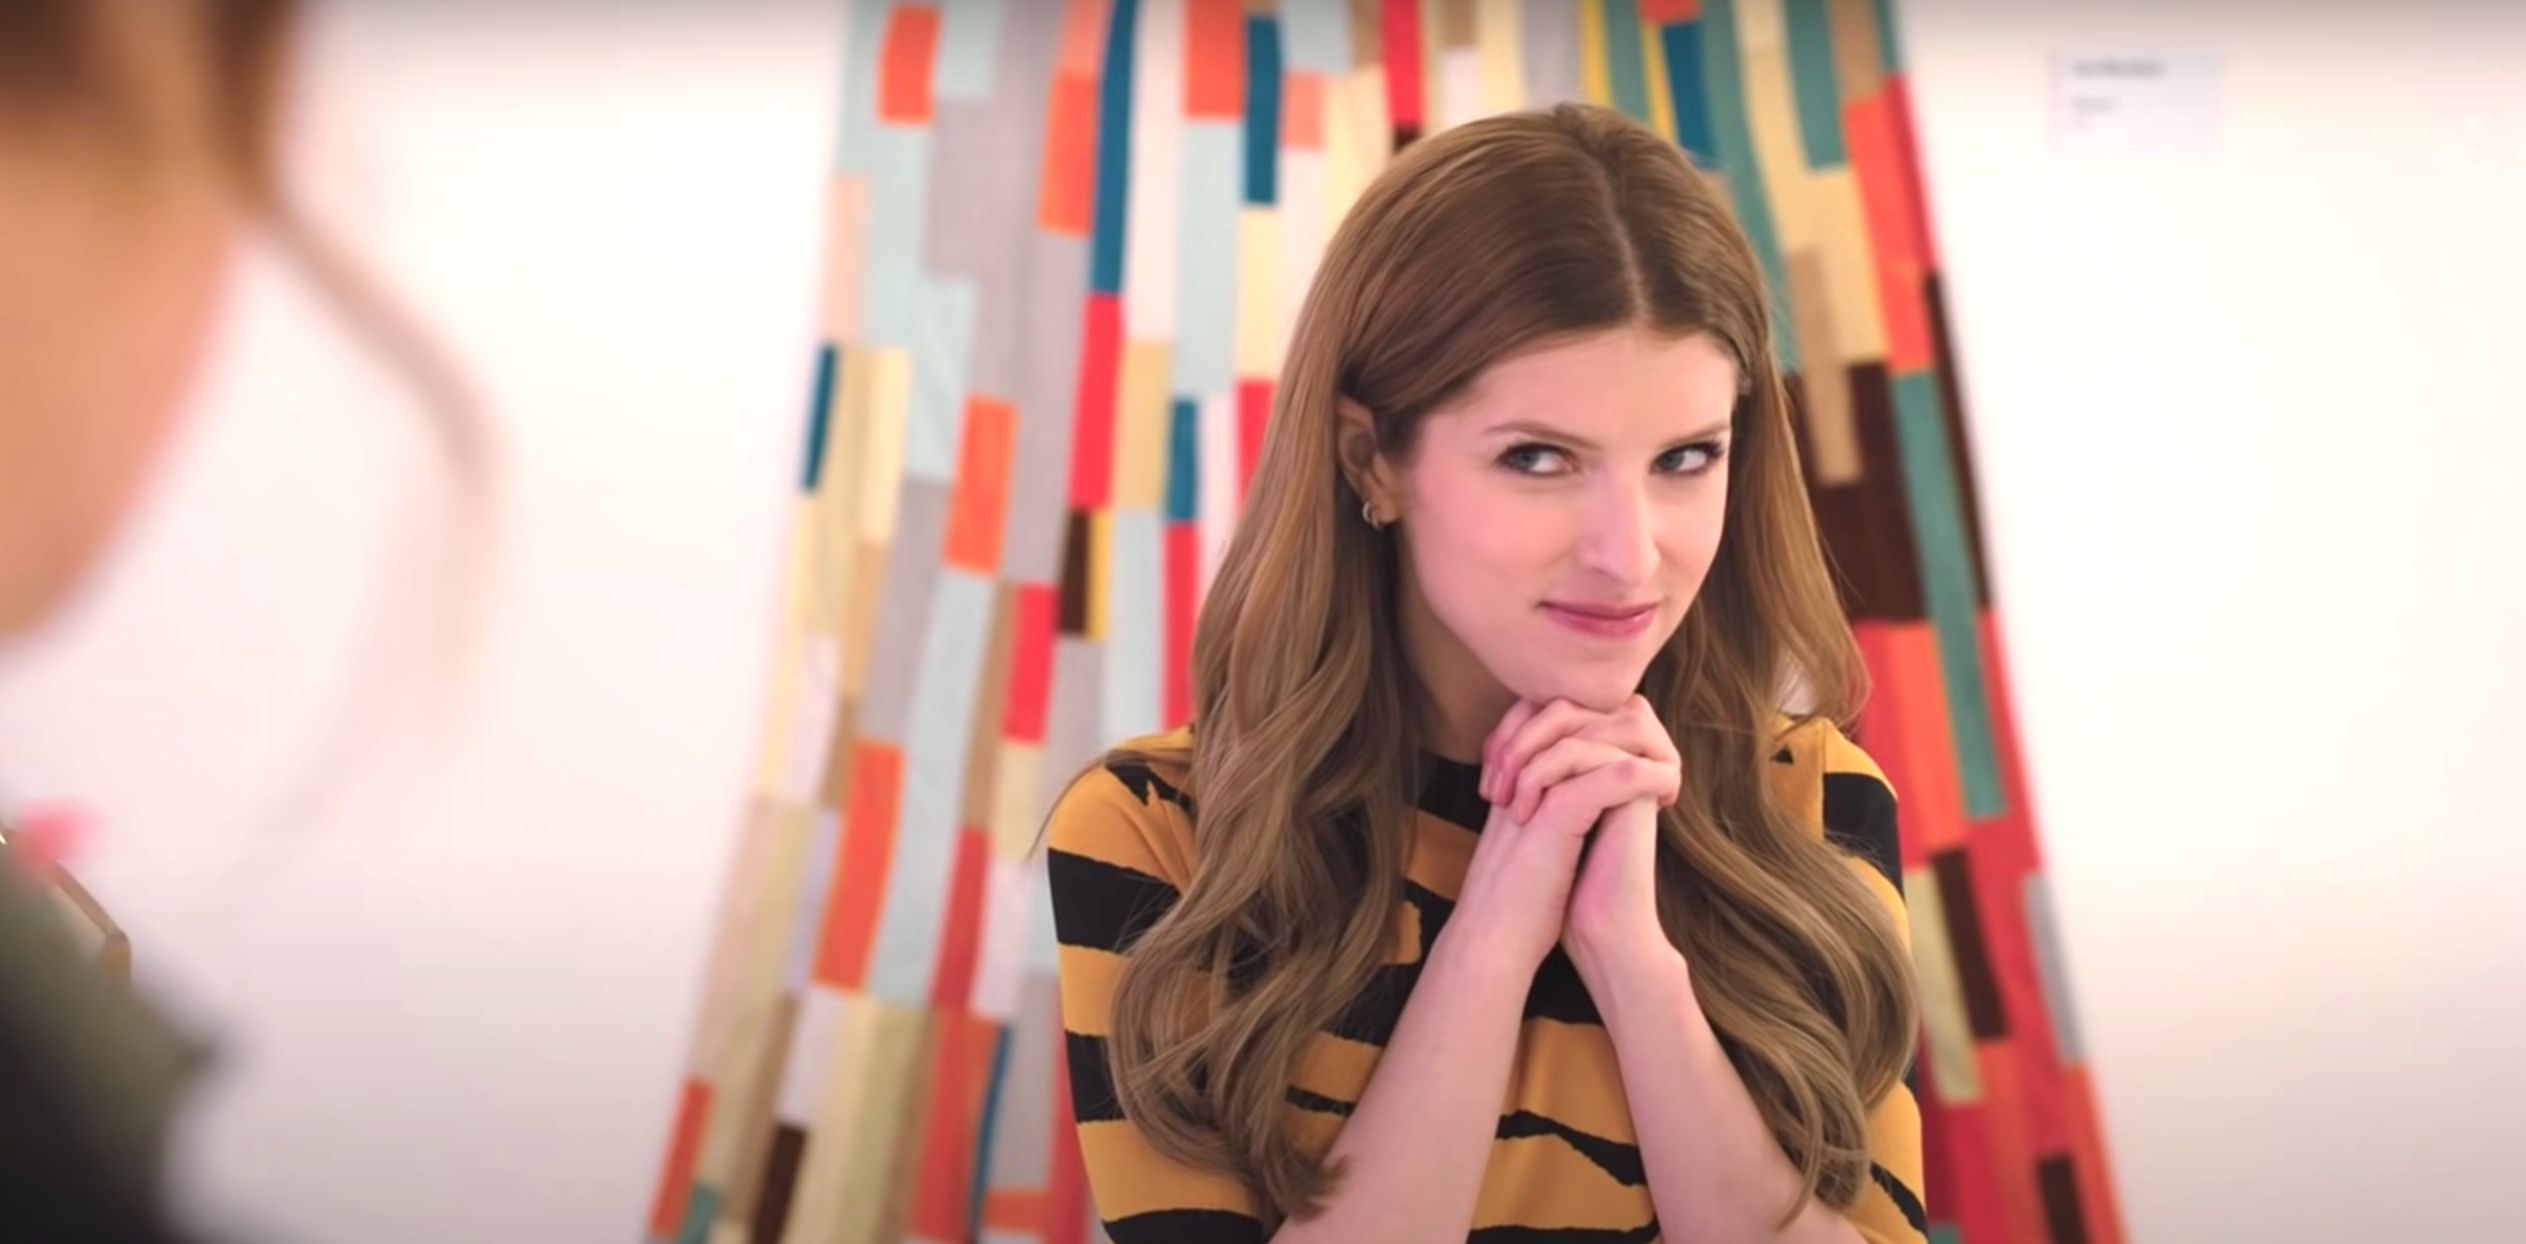 Love Life' Review: Anna Kendrick's HBO Max Comedy Is Basic and Bad